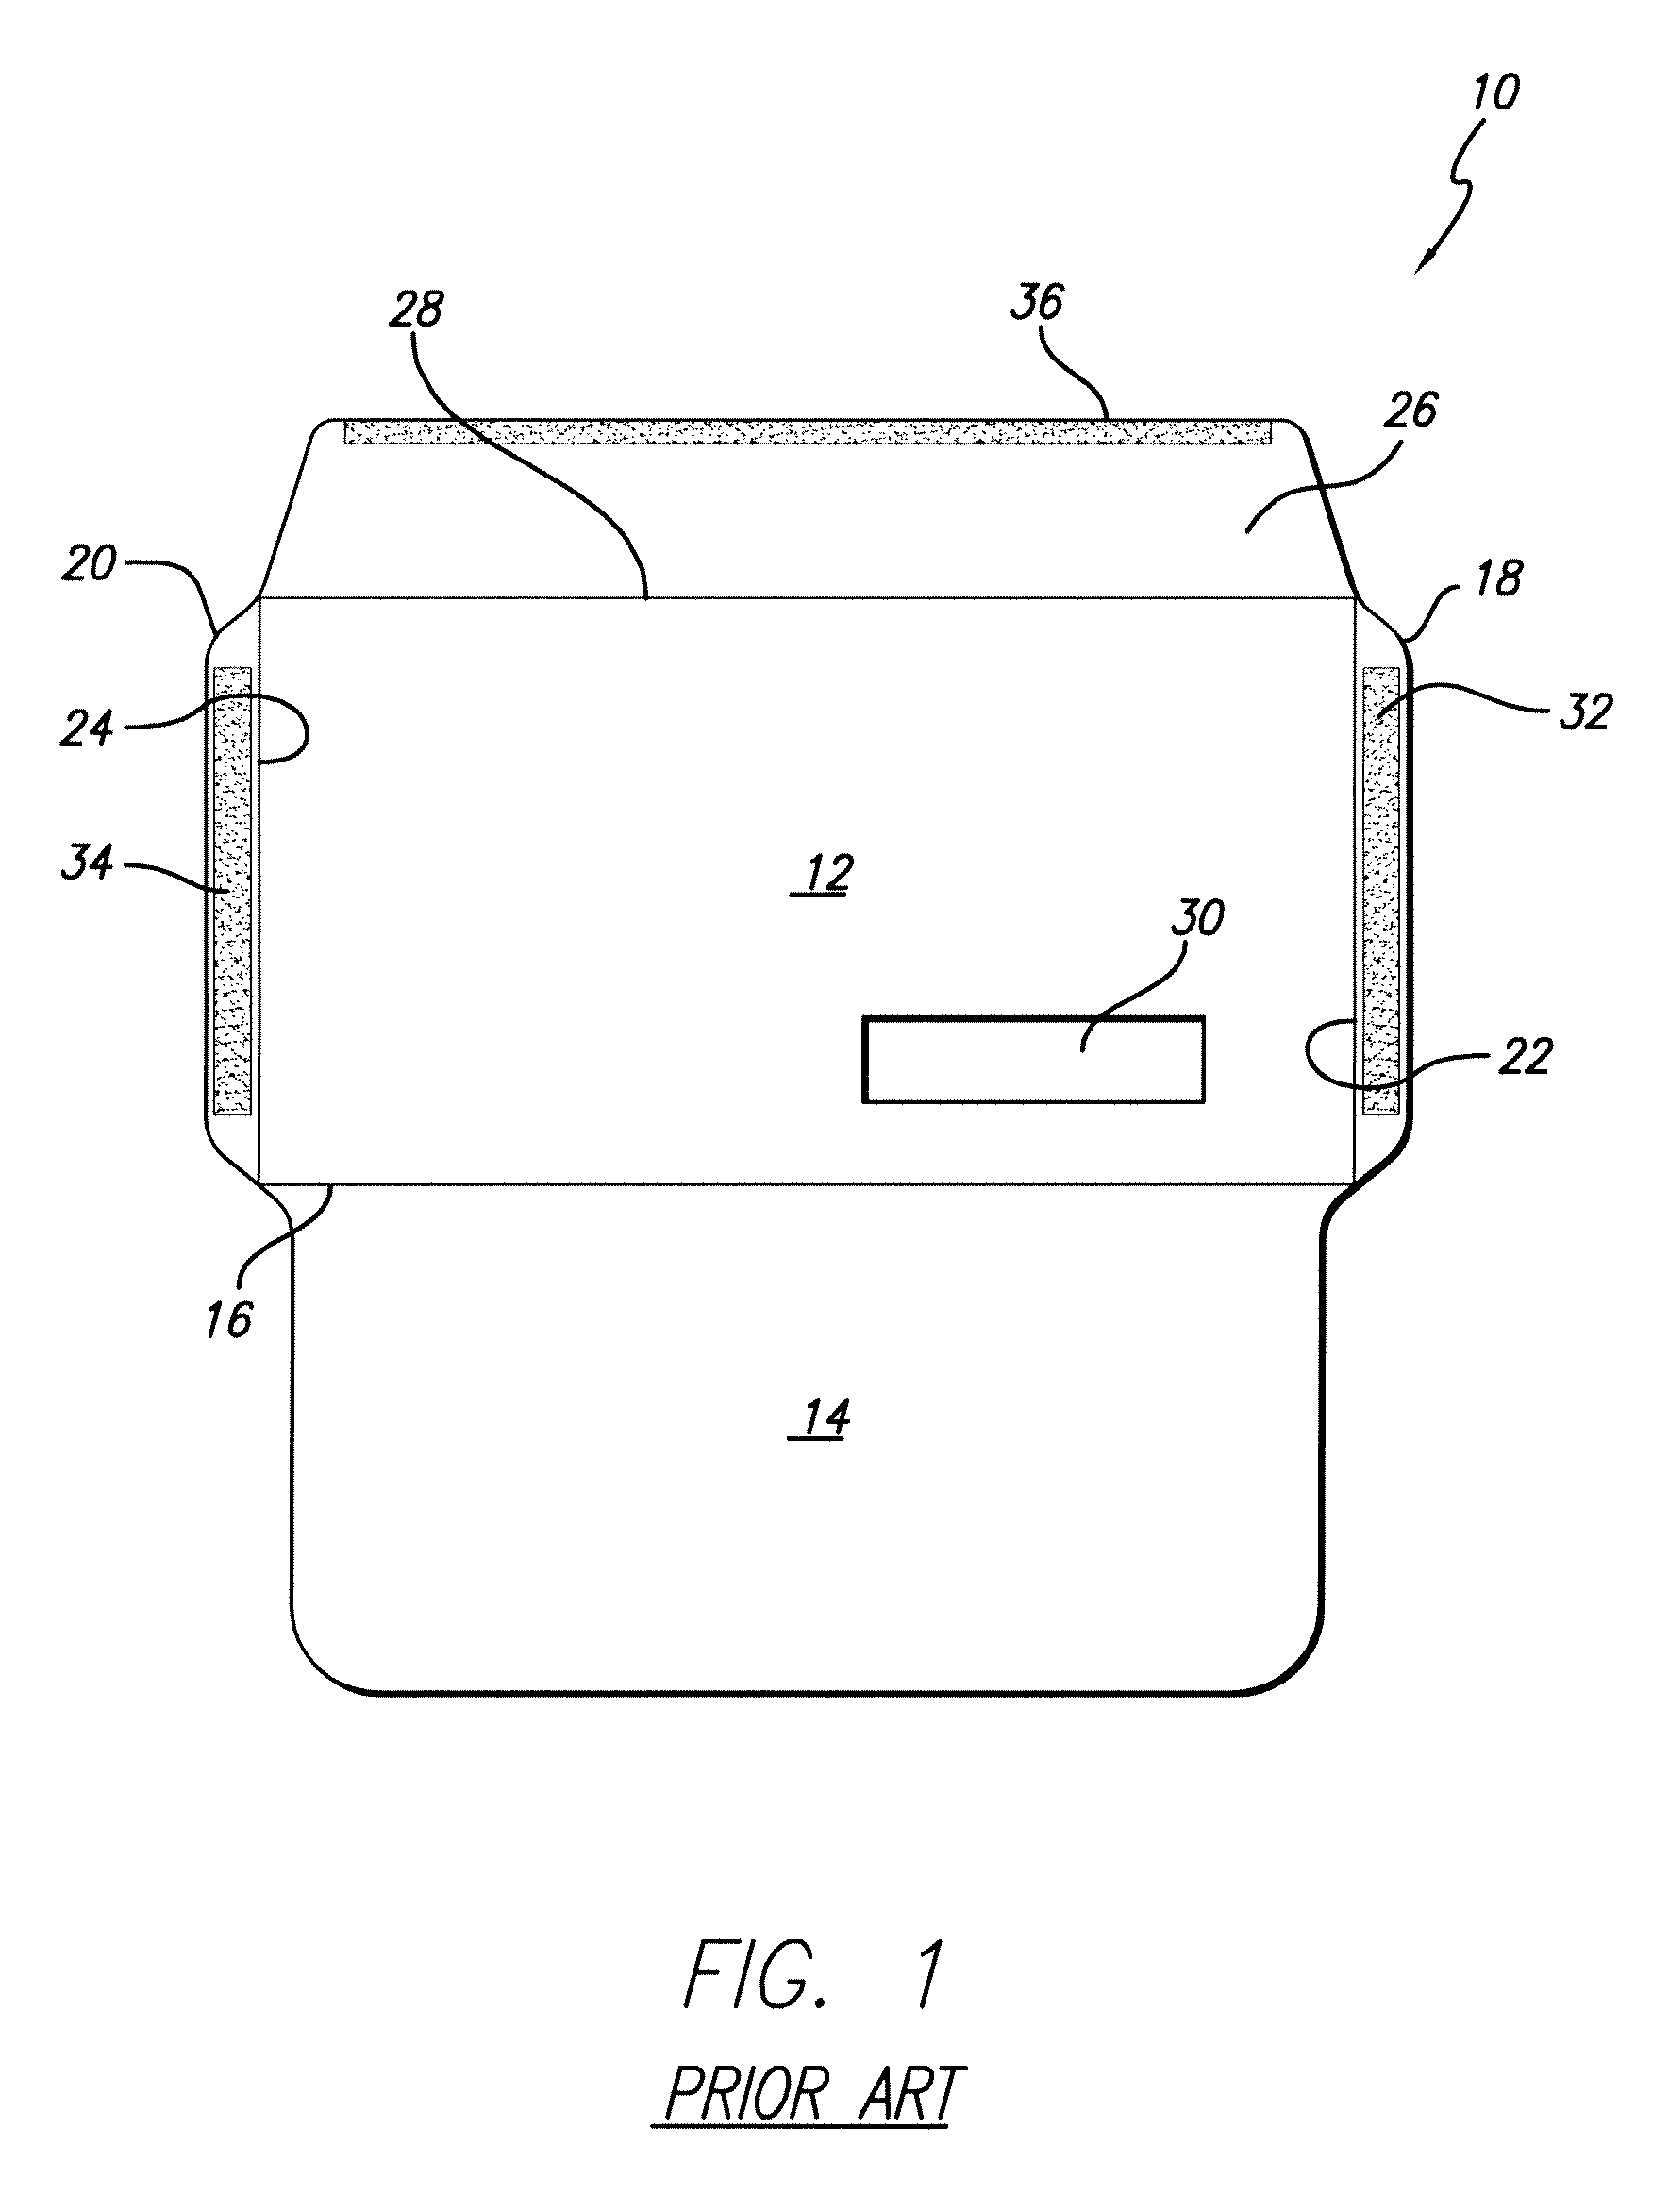 Apparatus and method for determining whether an envelope is in or out of specification